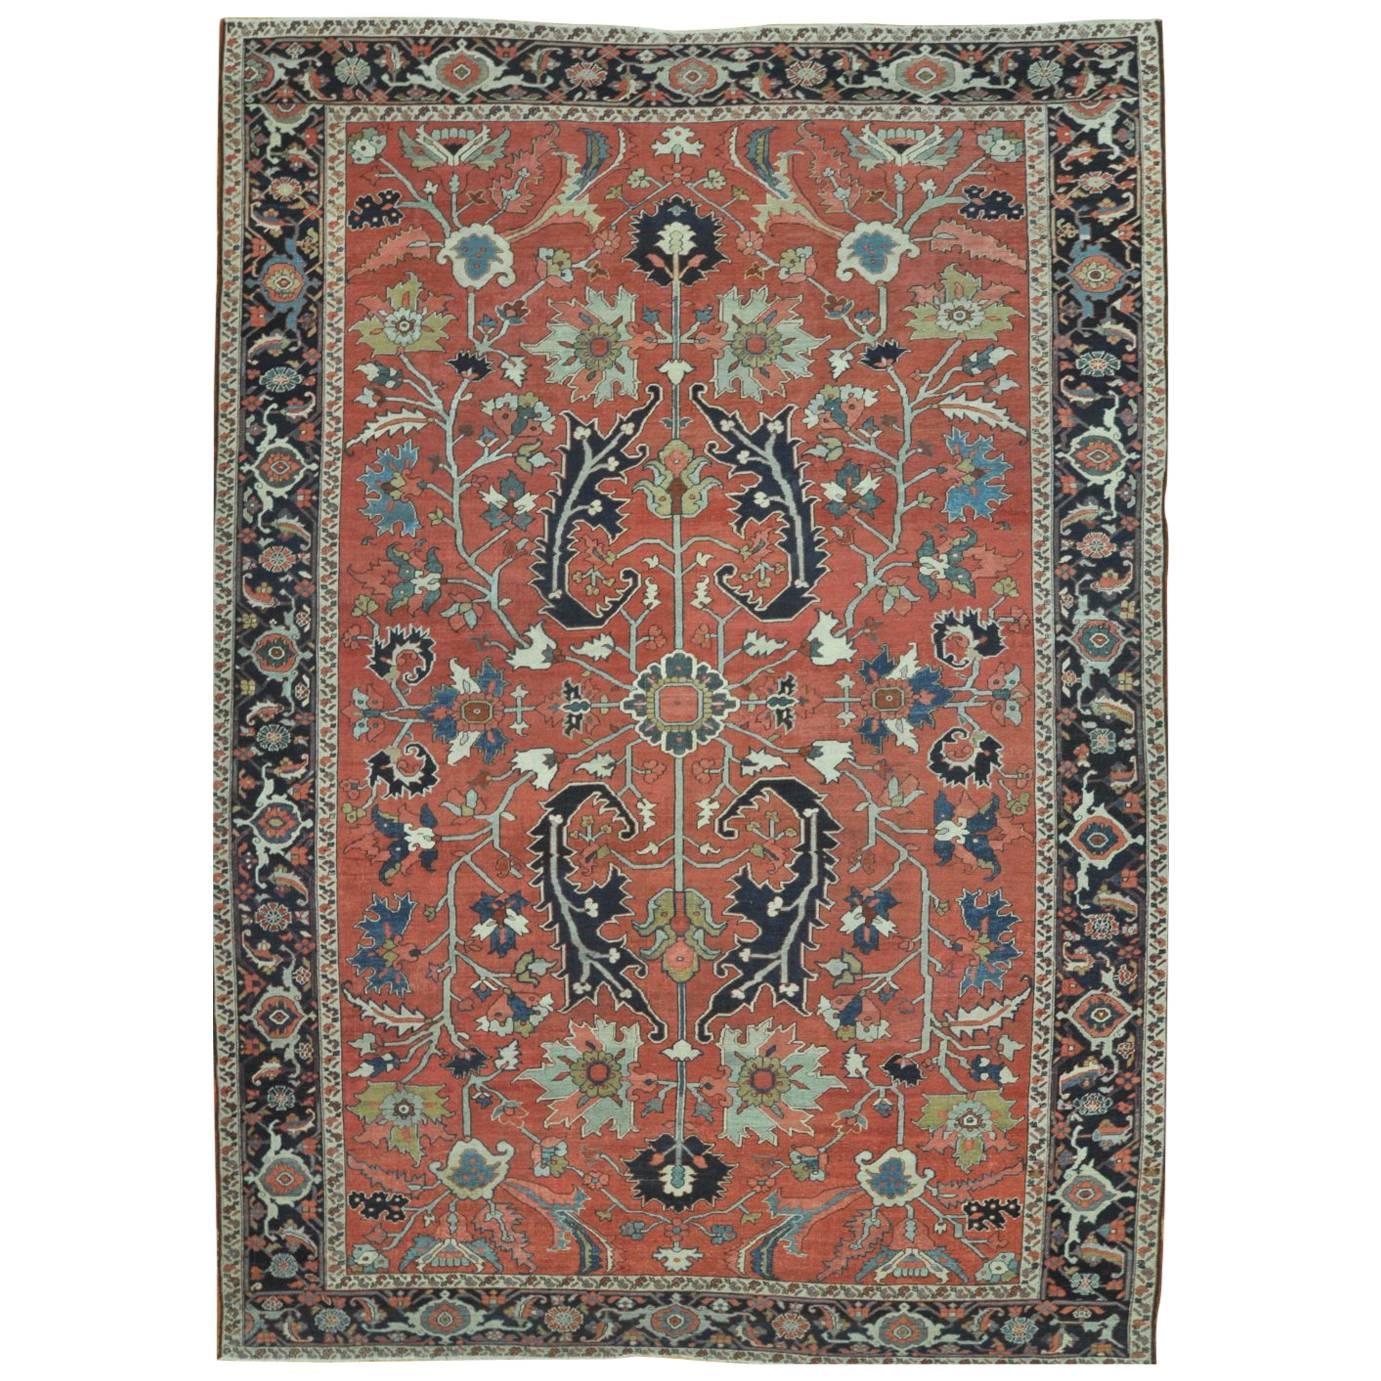 Antique Hand-Knotted Persian Serapi Rug